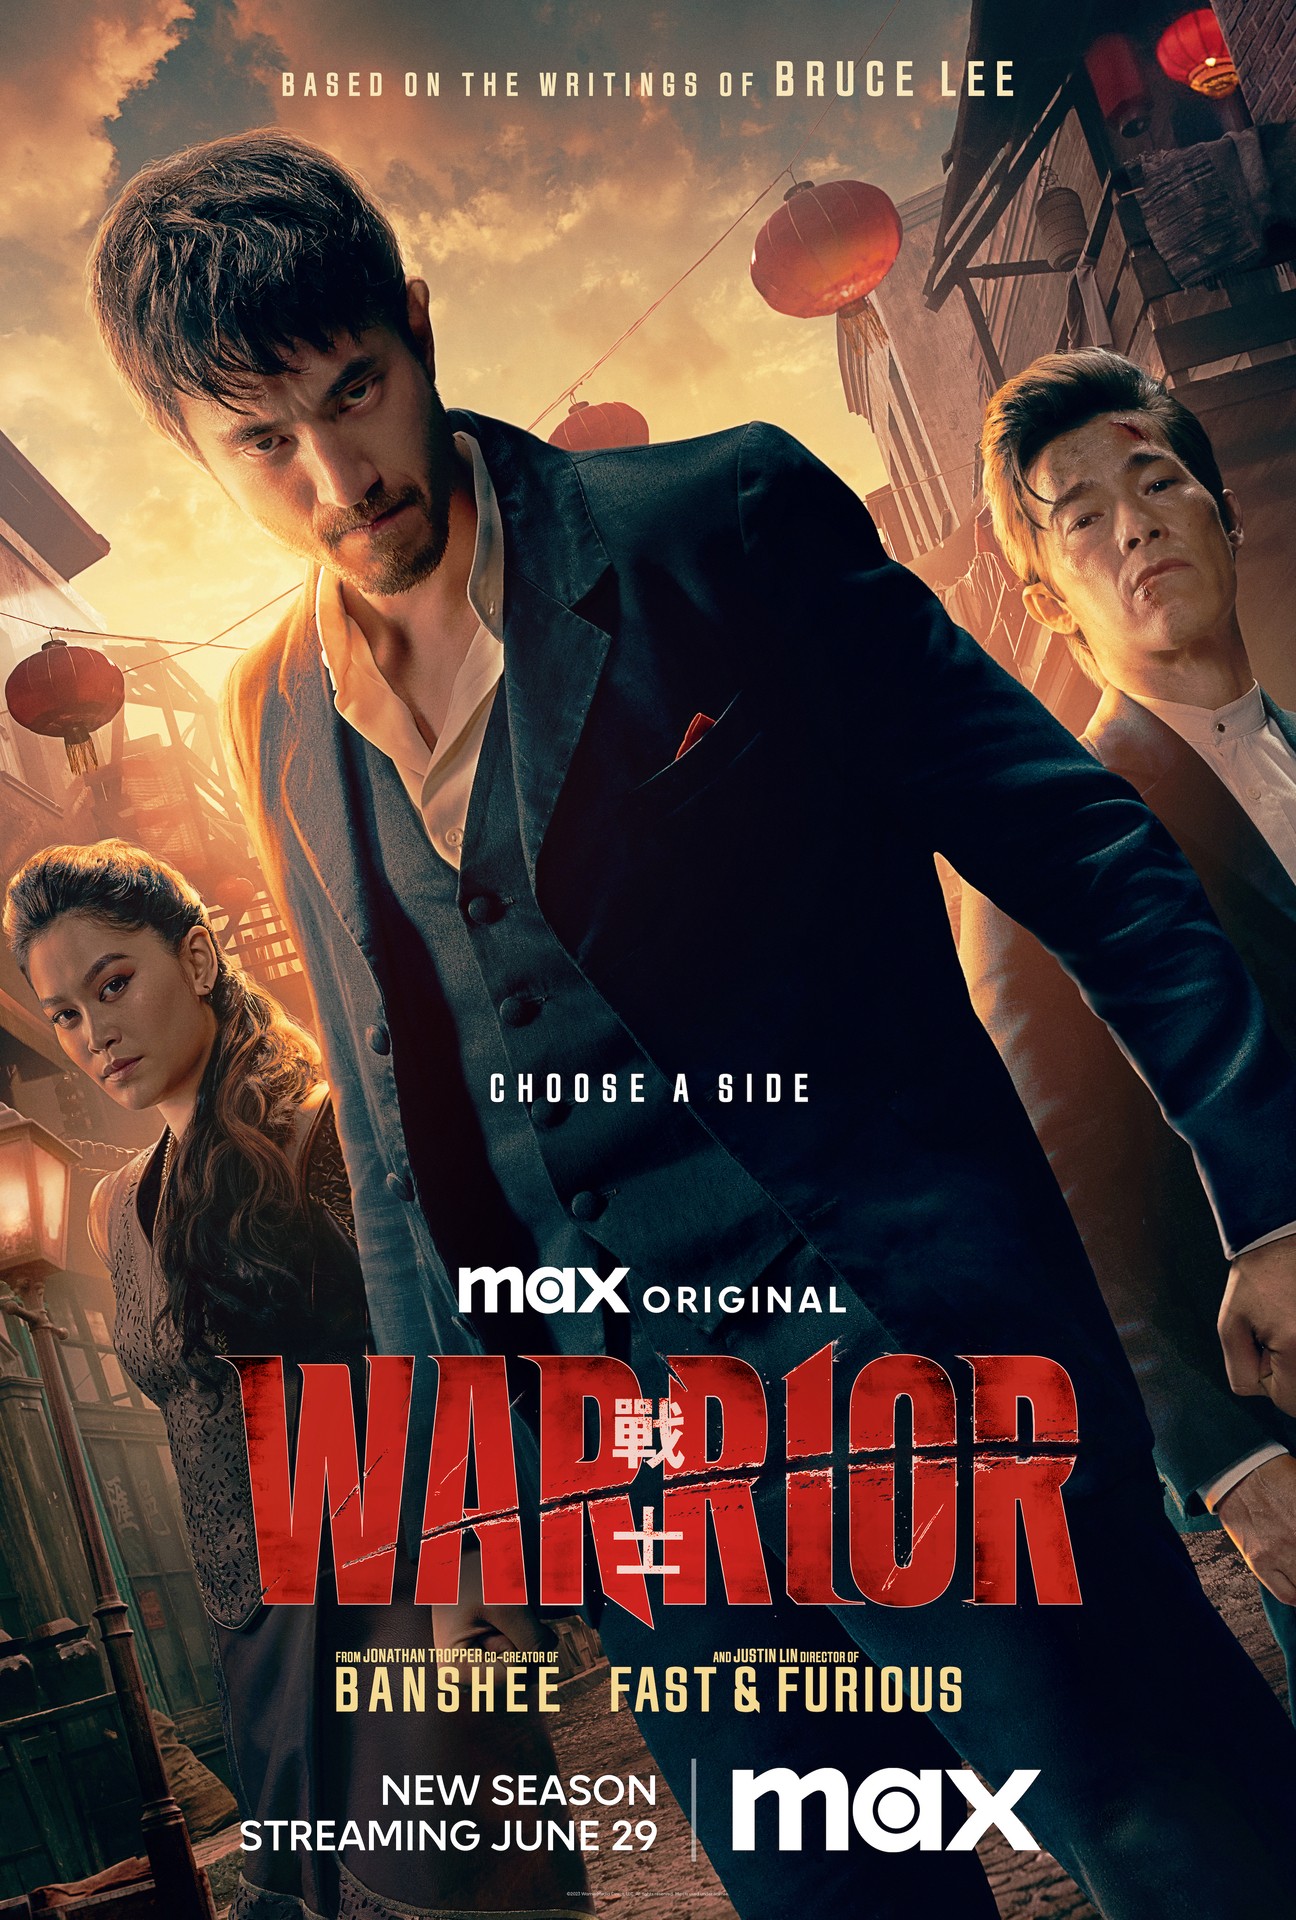 Warrior season 3 trailer and poster released by Max - IMDb